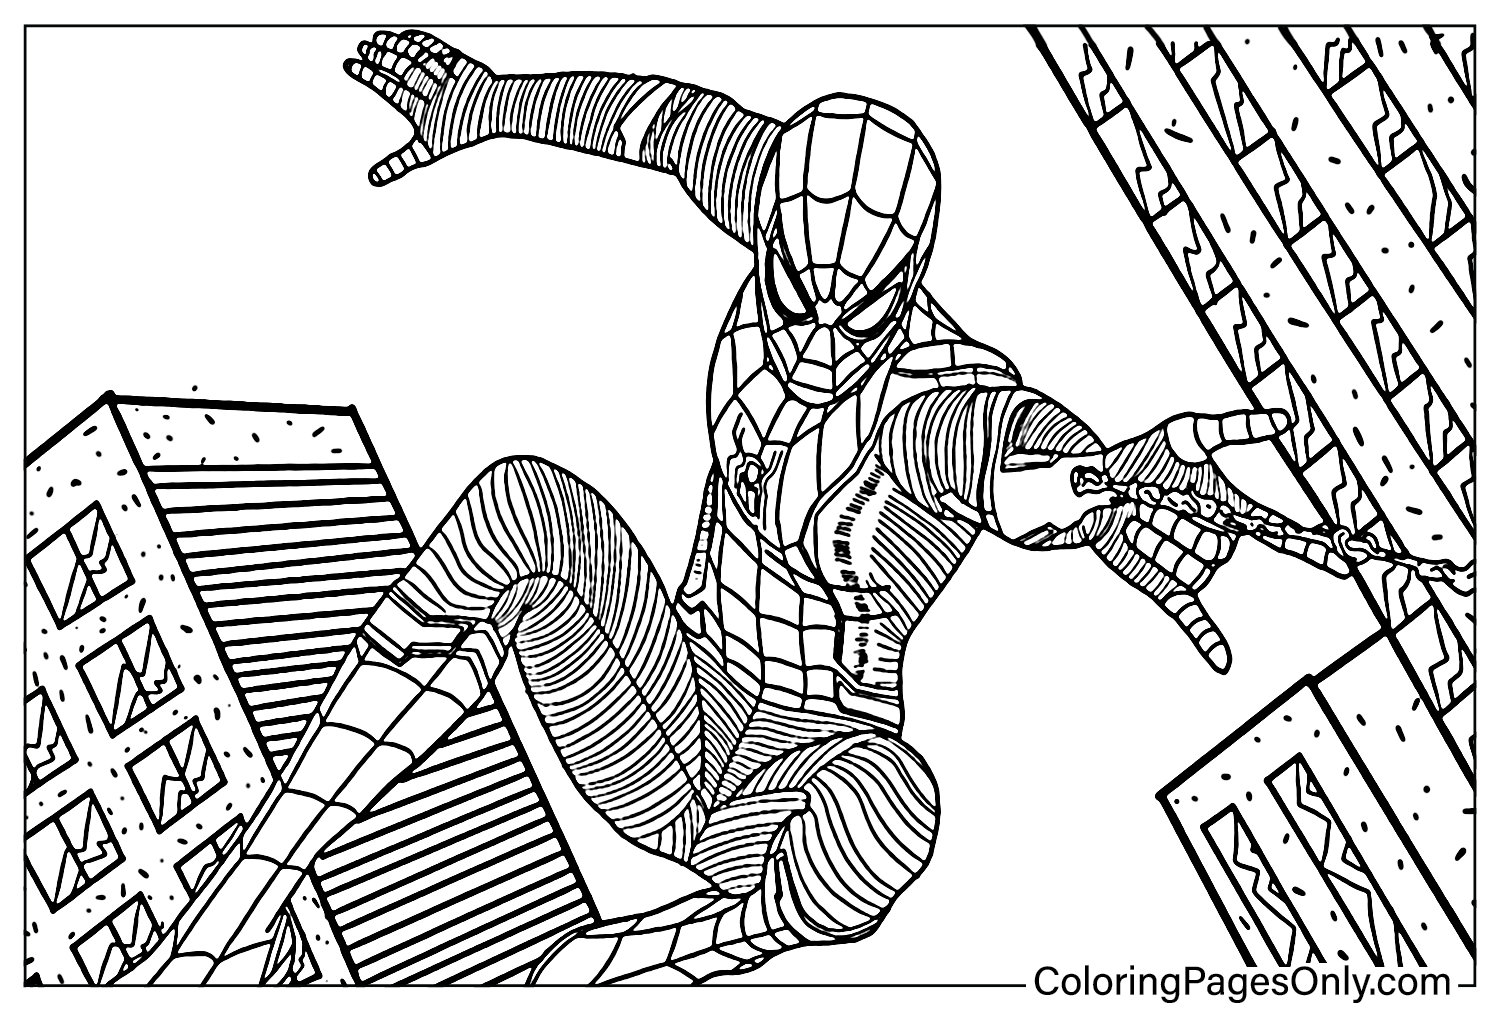 Spider-Man Far From Home Coloring Page from Spider-Man Far From Home